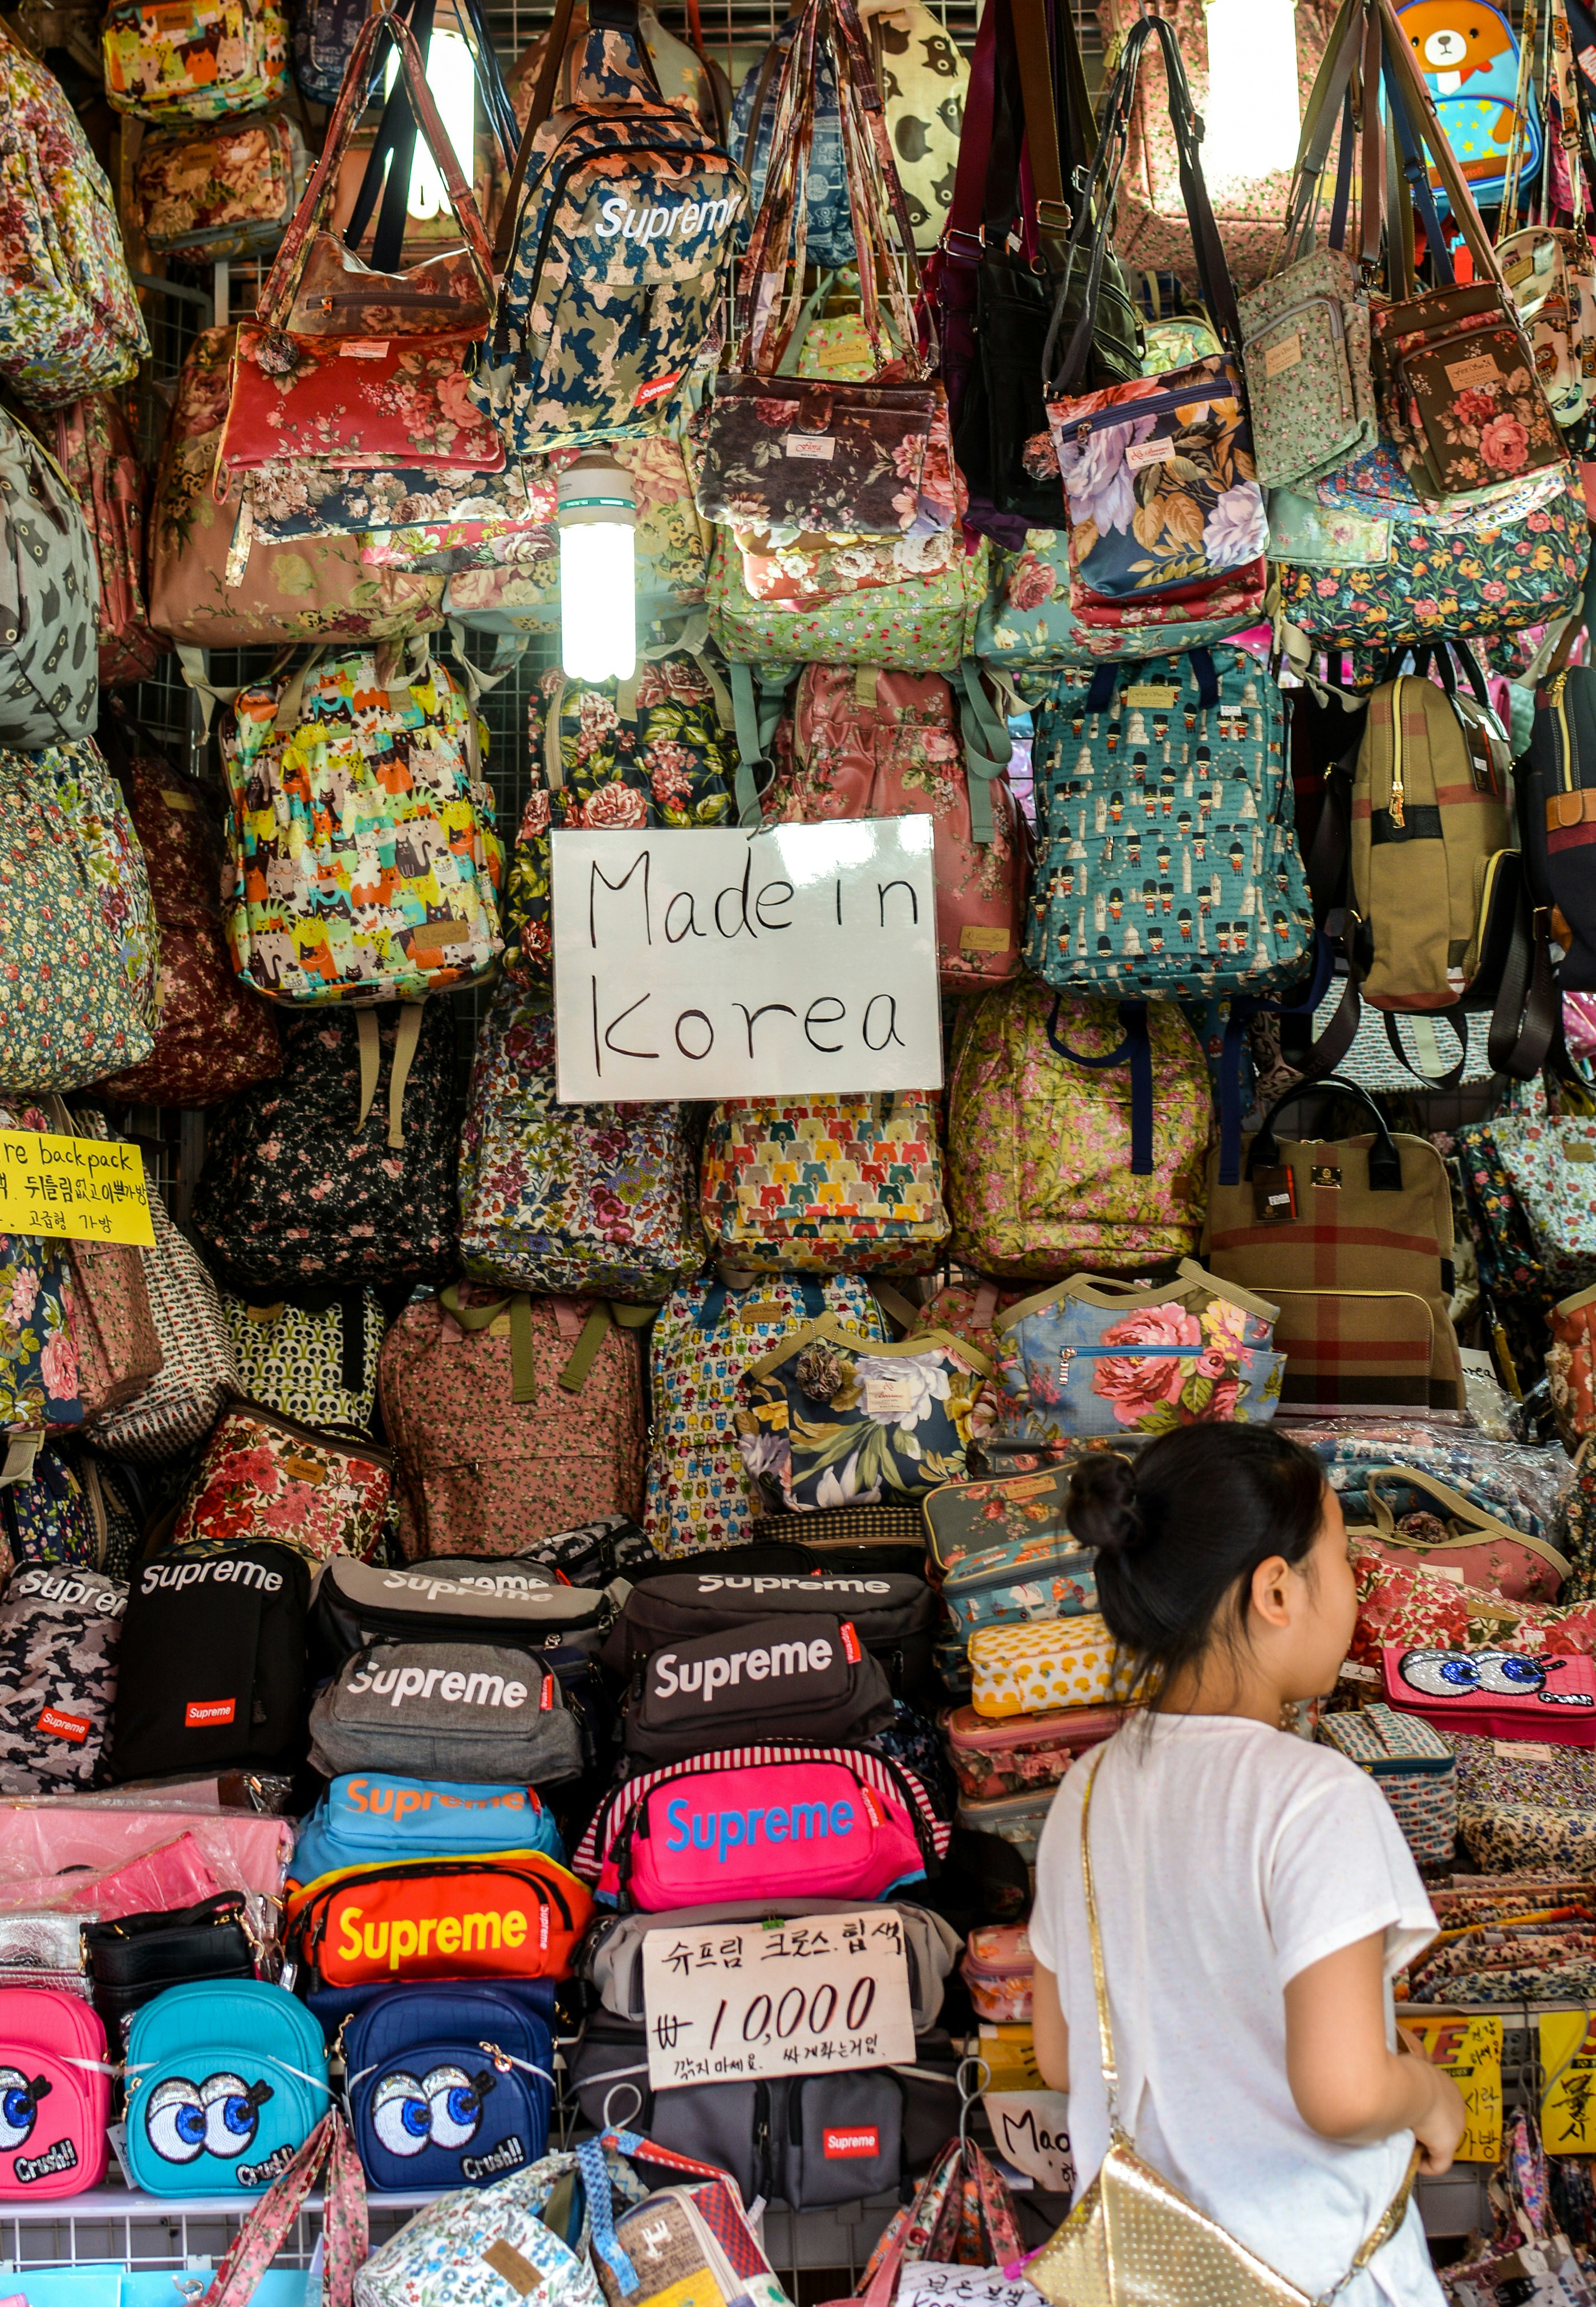 A shop selling bags in Namdaemun Market in Seoul, South Korea. The bags are really colorful and I love the emphasis on Made in Korea to attract buyers. Added tag for International Women’s Day 2019.